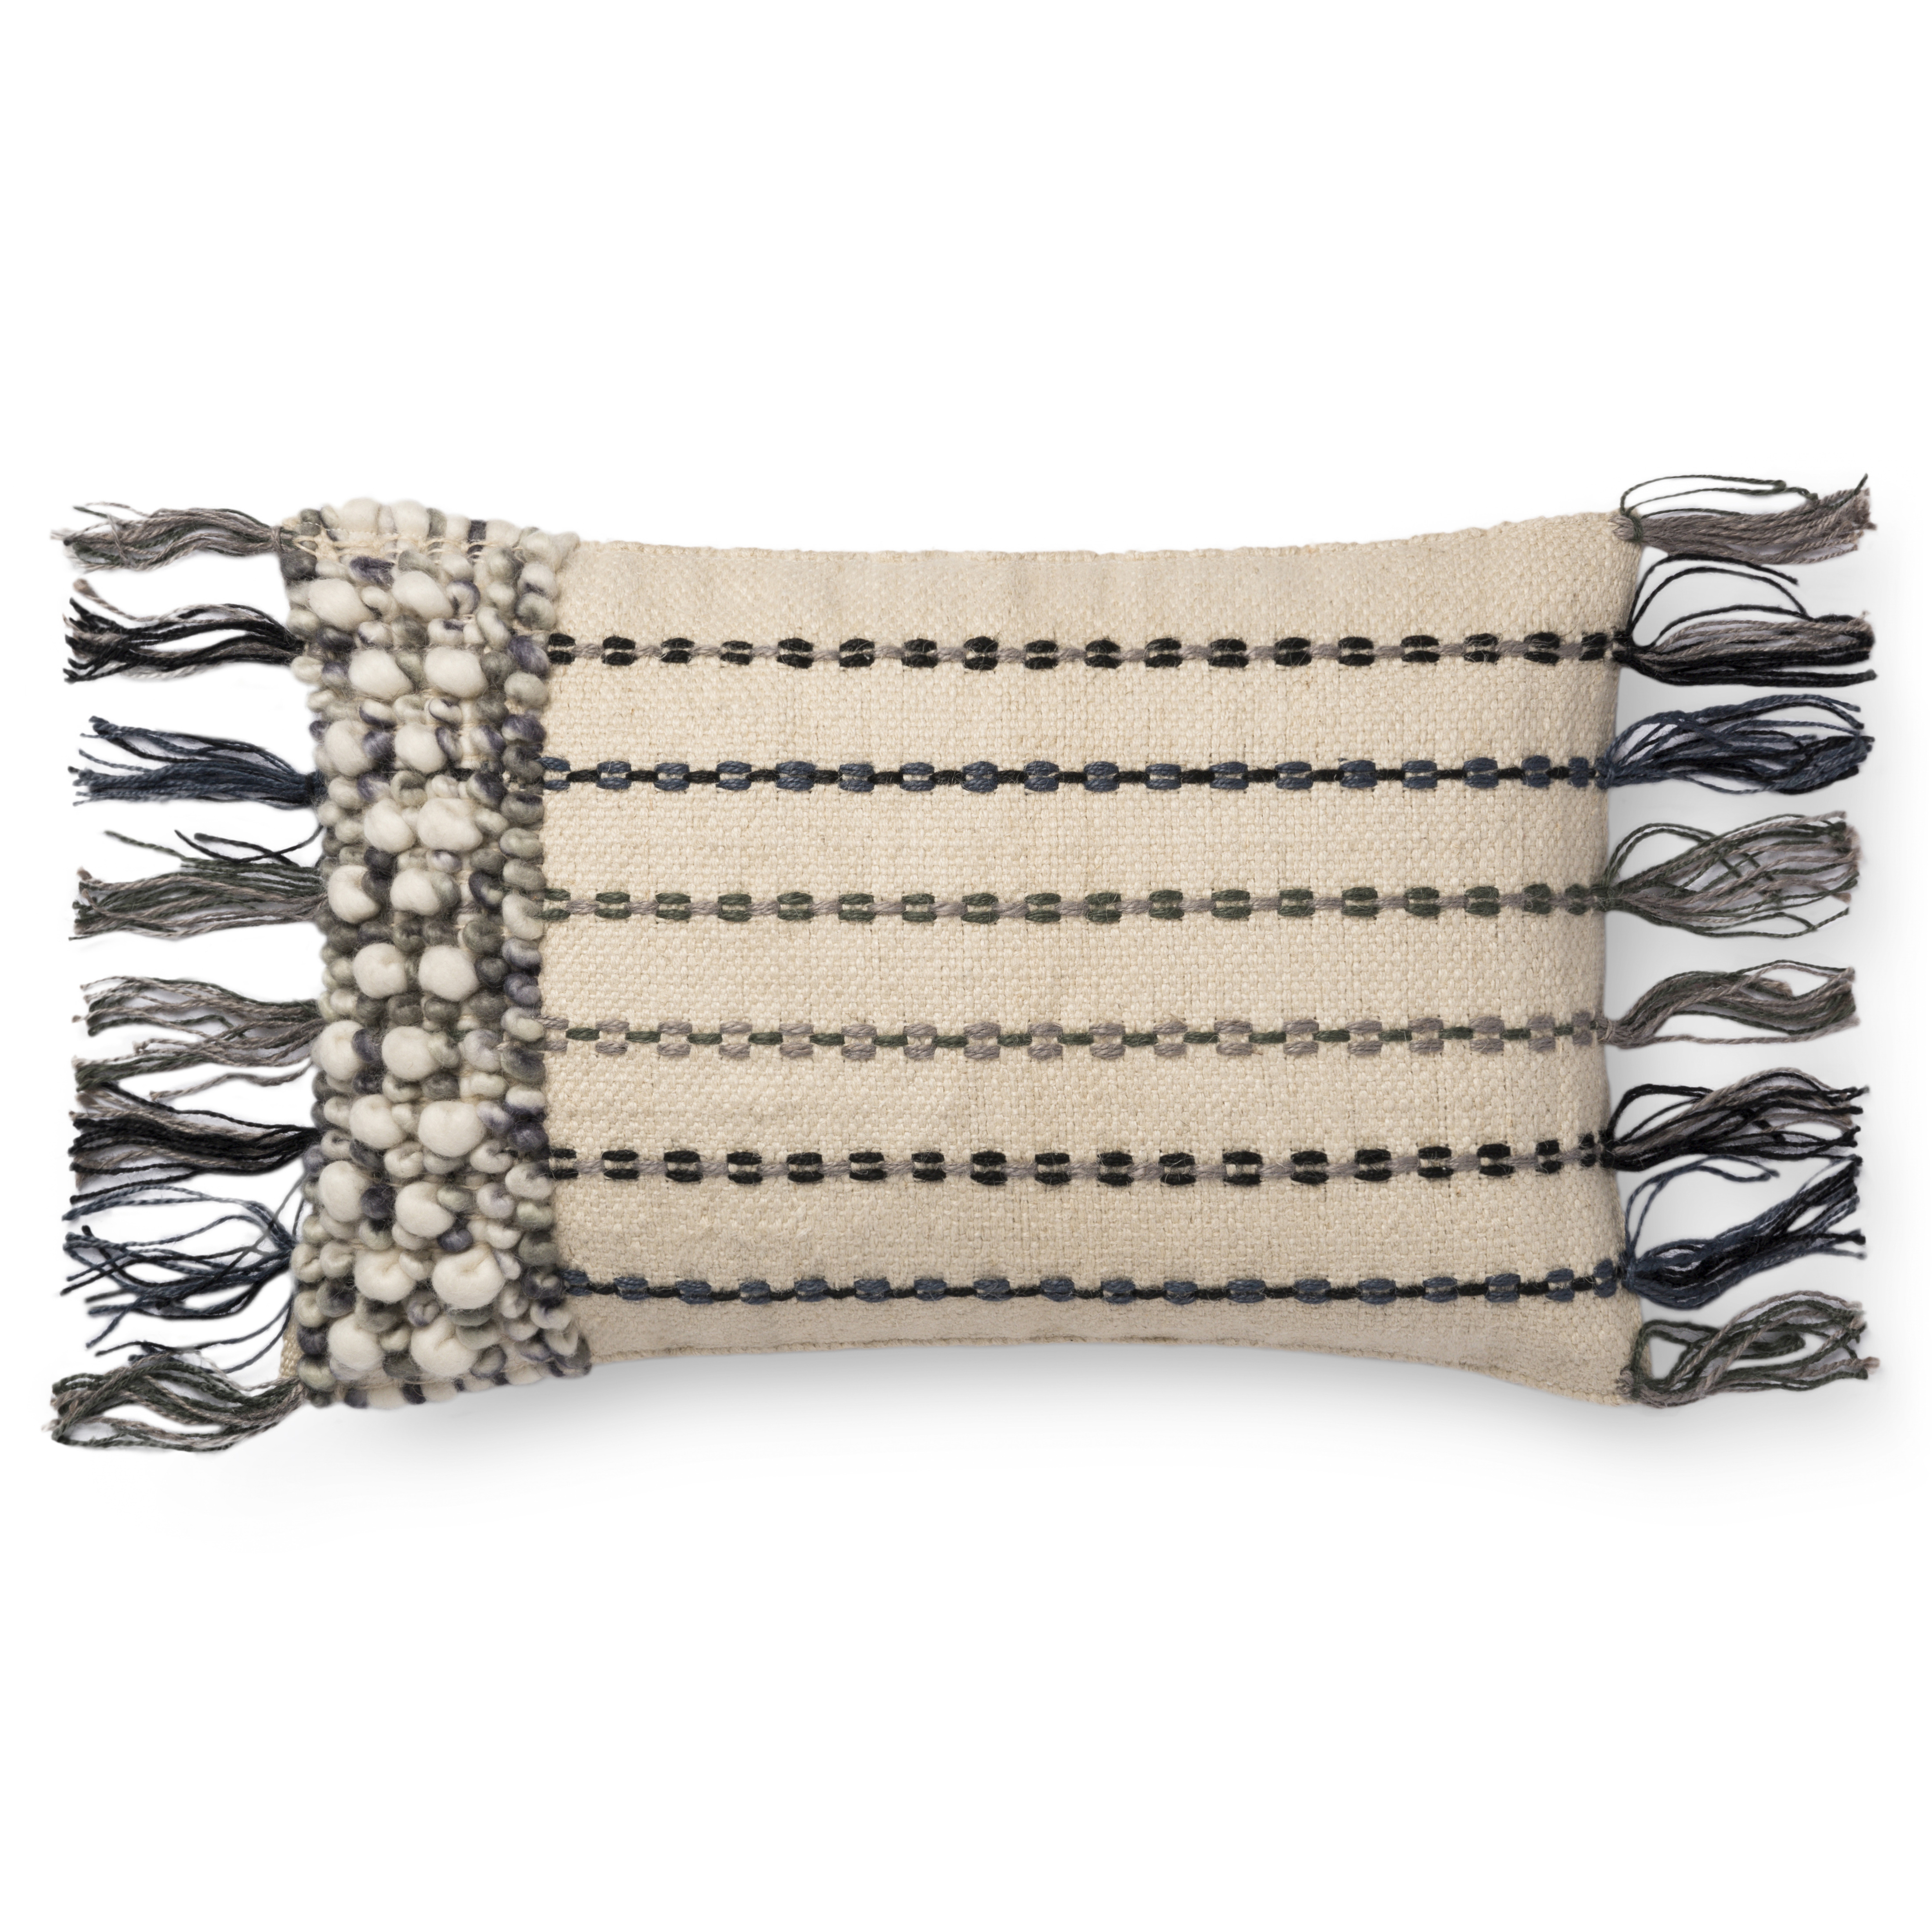 Woven Lumbar Pillow Cover with Tassels, 13" x 21", Natural & Blue - Loloi Rugs